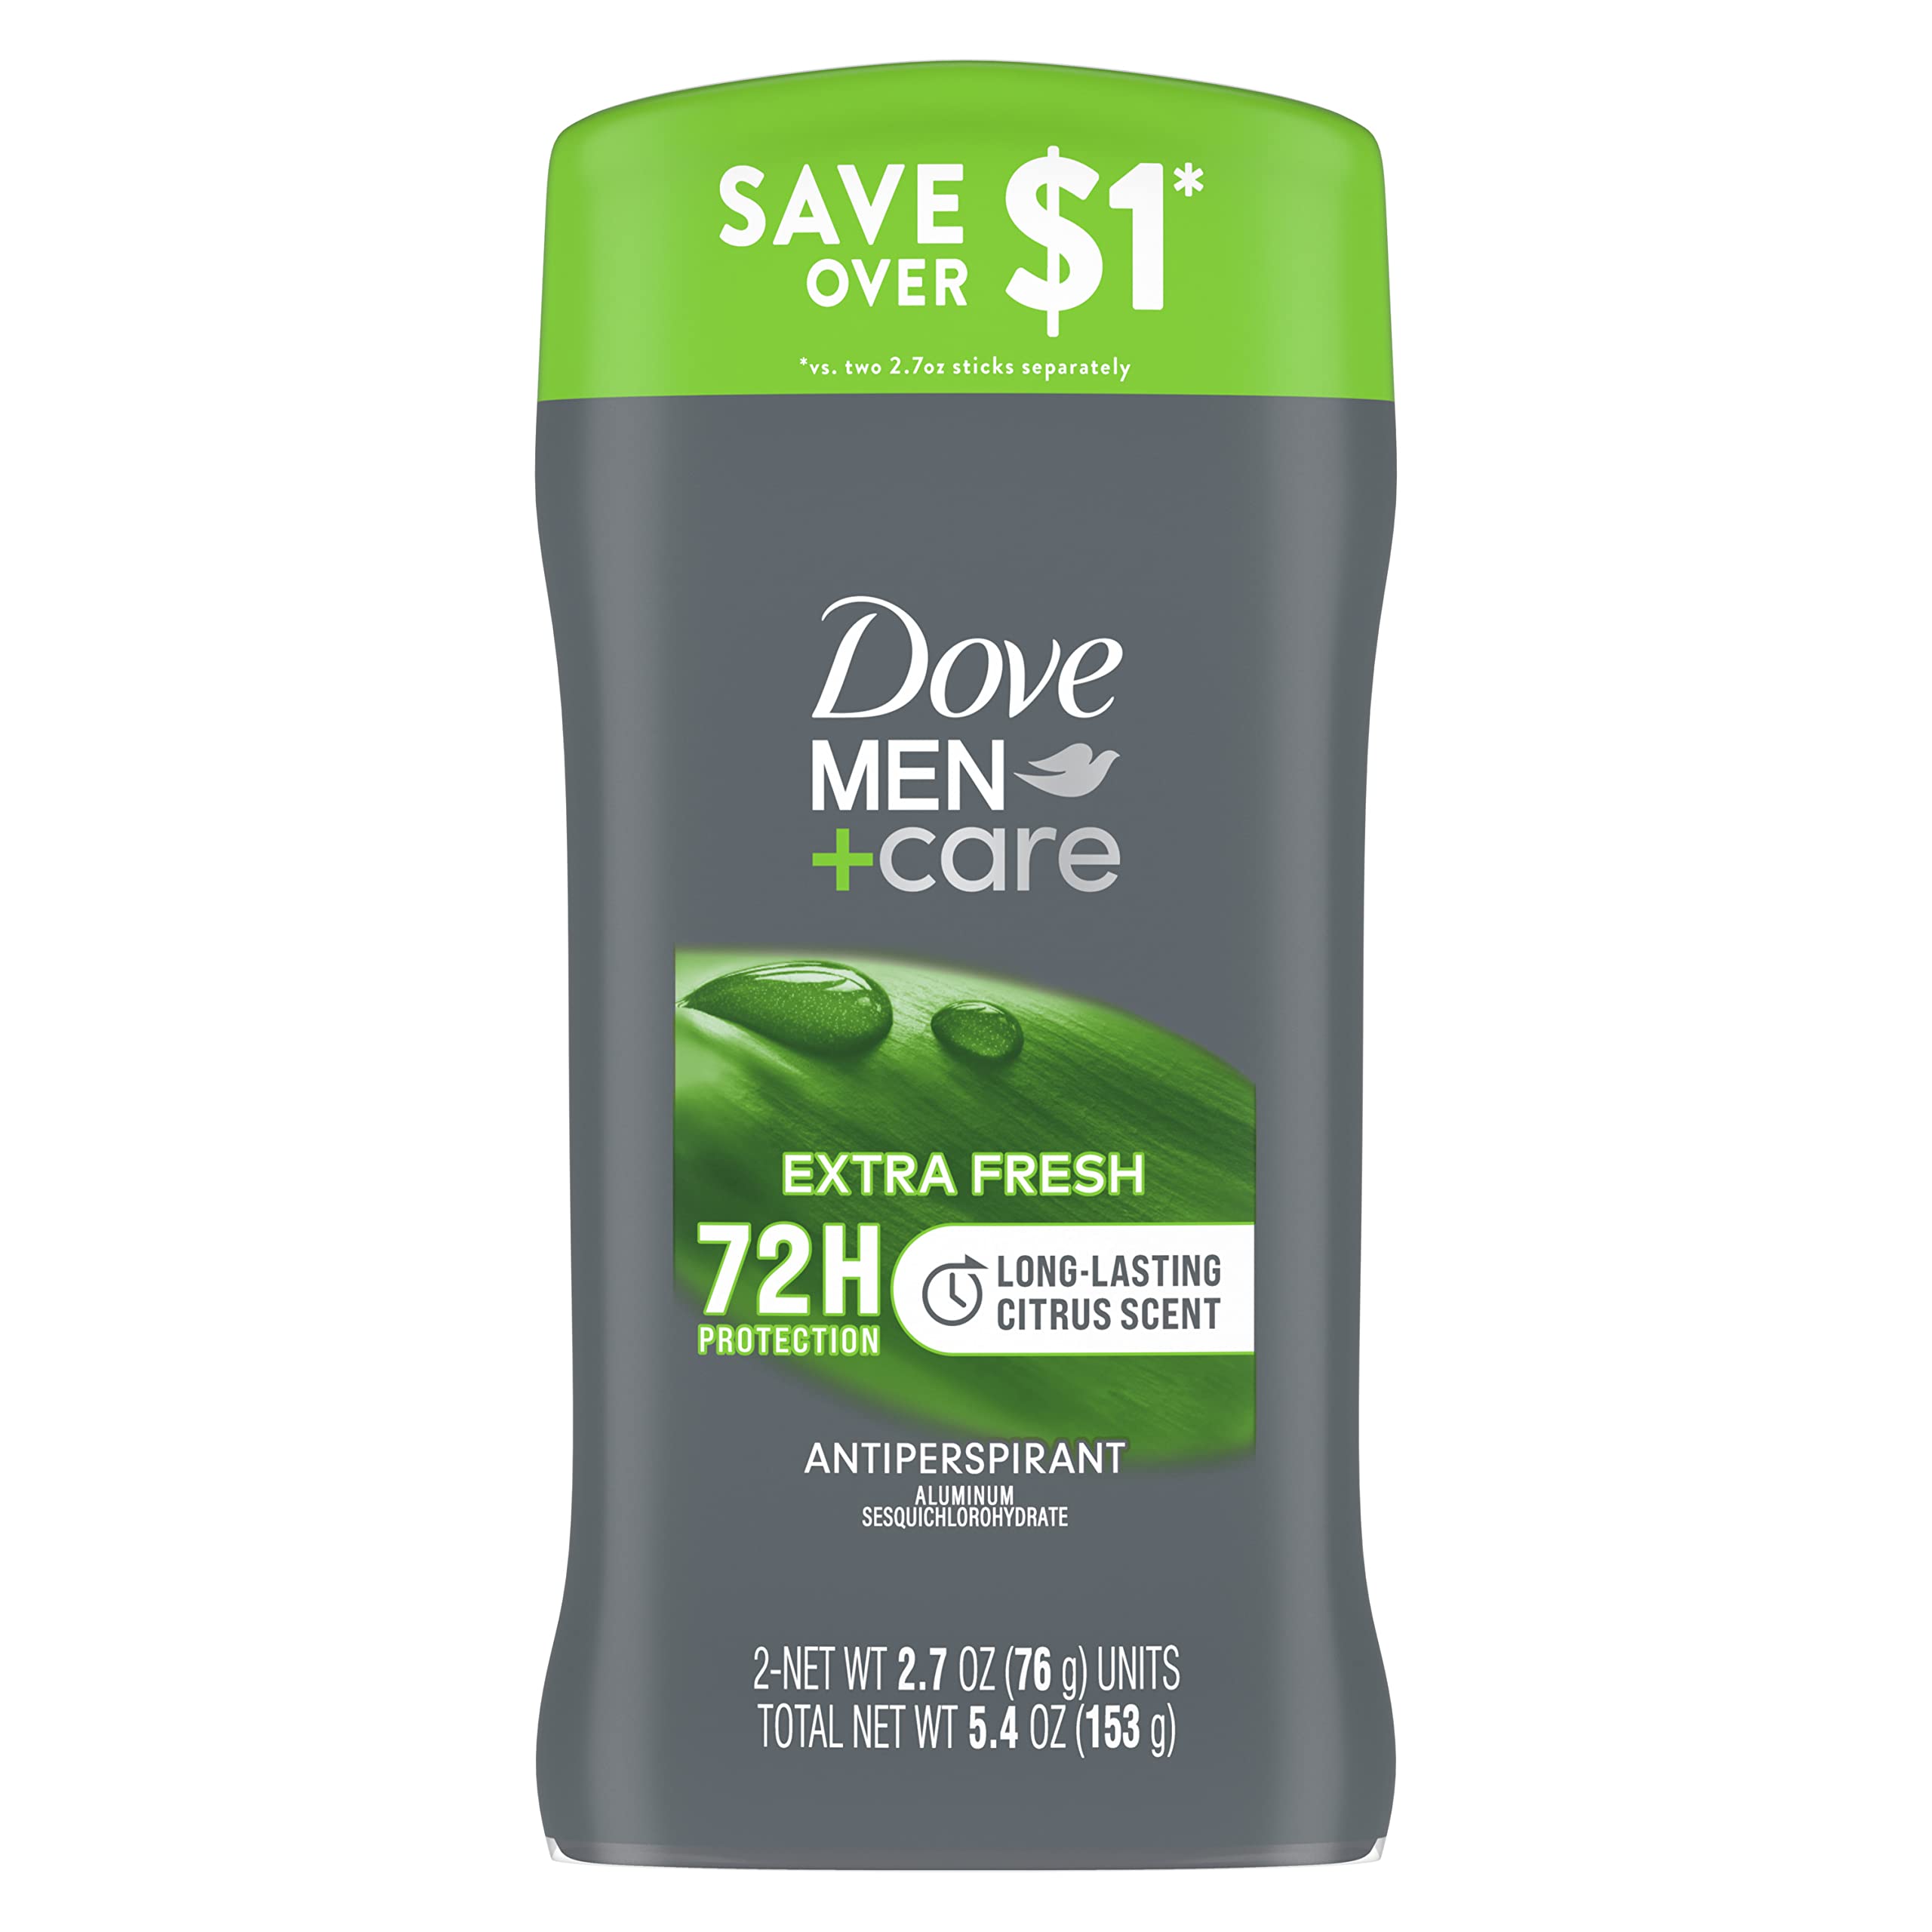 Dove Men+Care Extra Fresh Men's Antiperspirant Deodorant Stick Extra Fresh Twin pack With 72-hour sweat & odor protection with 1/4 Moisturizing Cream & Long-lasting Citrus Scent 2.7 Ounce (Pack of 2)